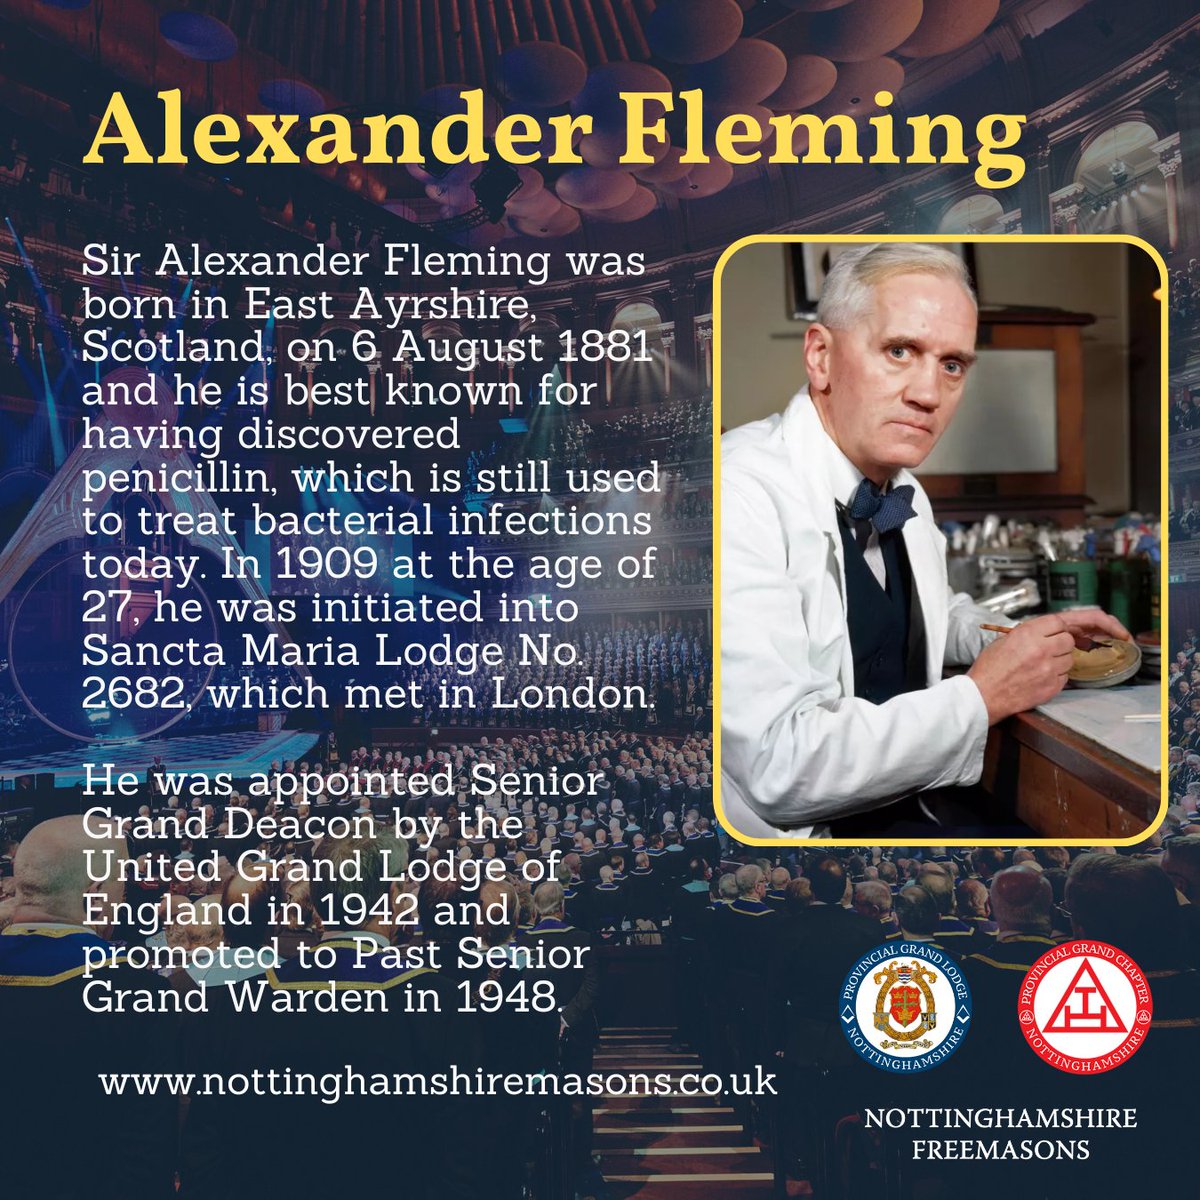 Sir Alexander Fleming was initiated into Sancta Maria Lodge No. 2682. He served as Master in 1924, and was appointed Senior Grand Deacon by the United Grand Lodge of England in 1942 and promoted to Past Senior Grand Warden in 1948 nottinghamshiremasons.co.uk #Freemasons